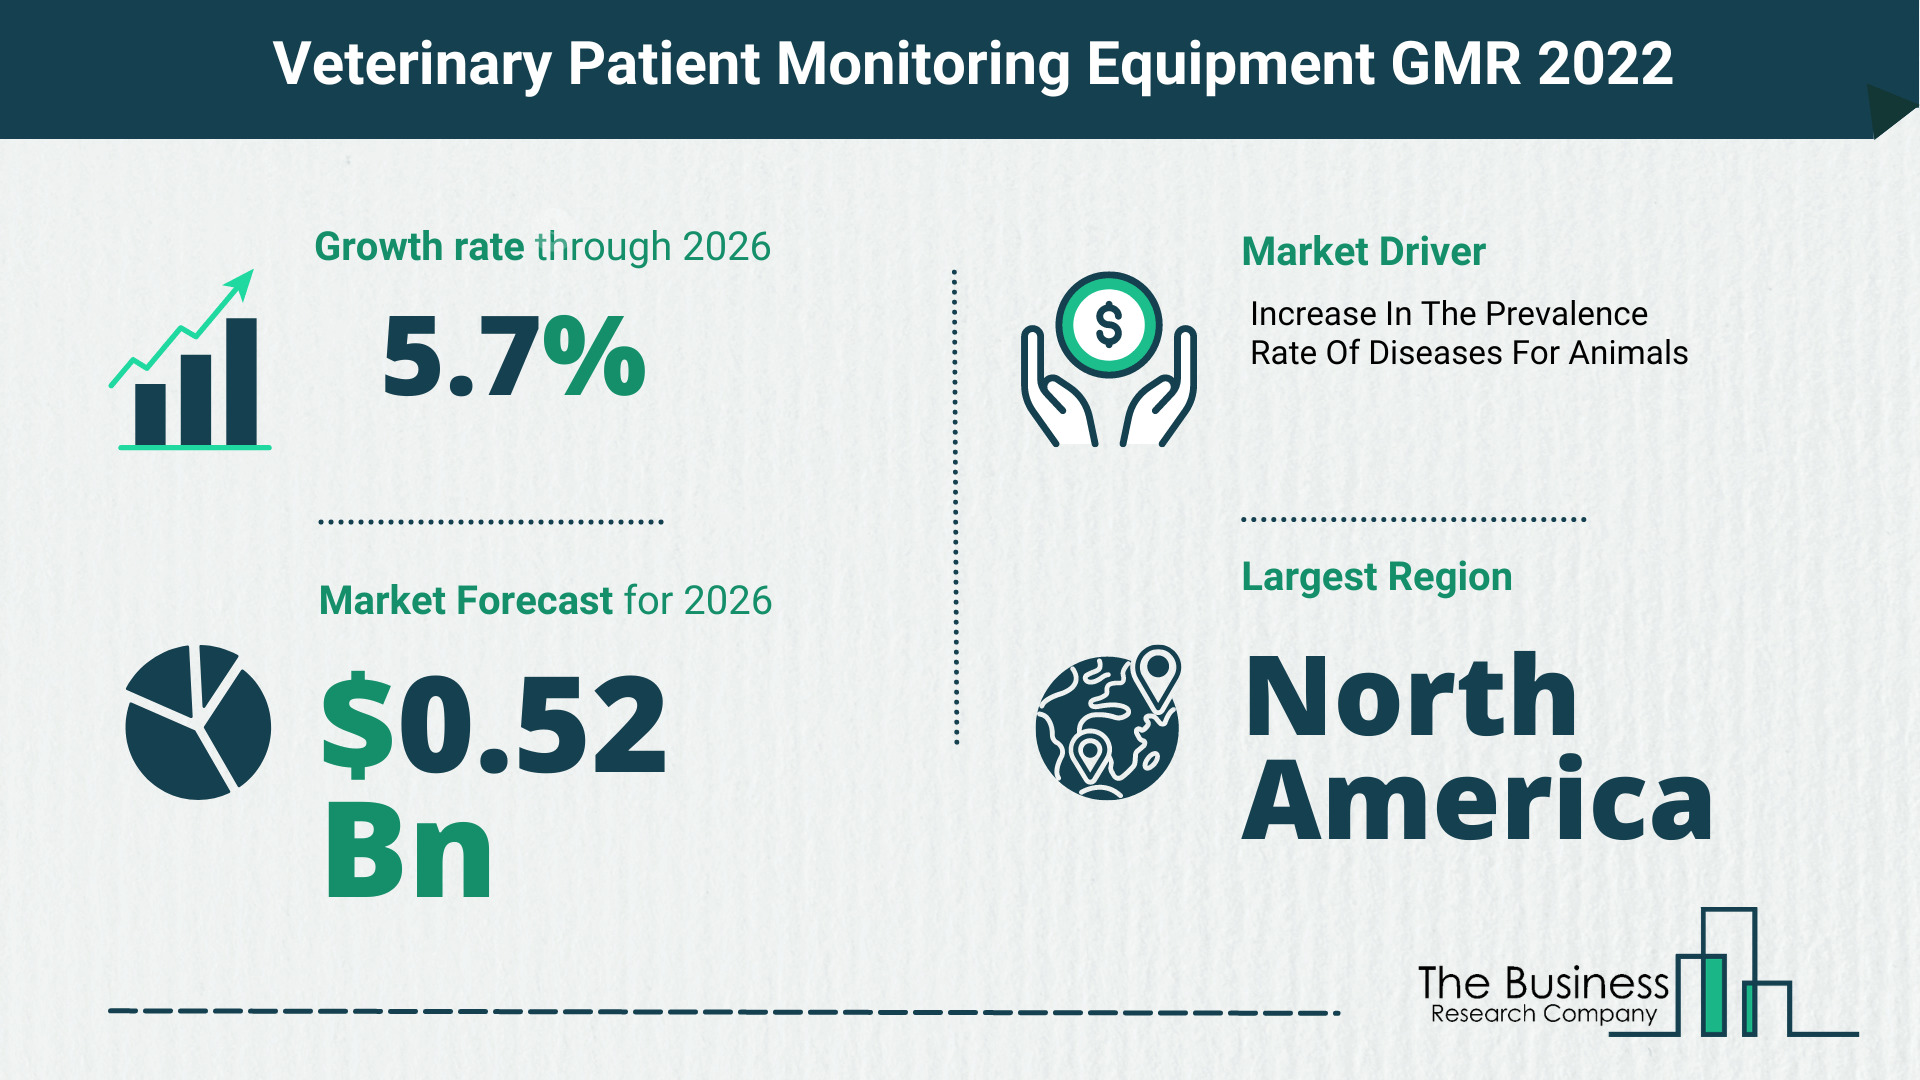 Latest Veterinary Patient Monitoring Equipment Market Growth Study 2022-2026 By The Business Research Company